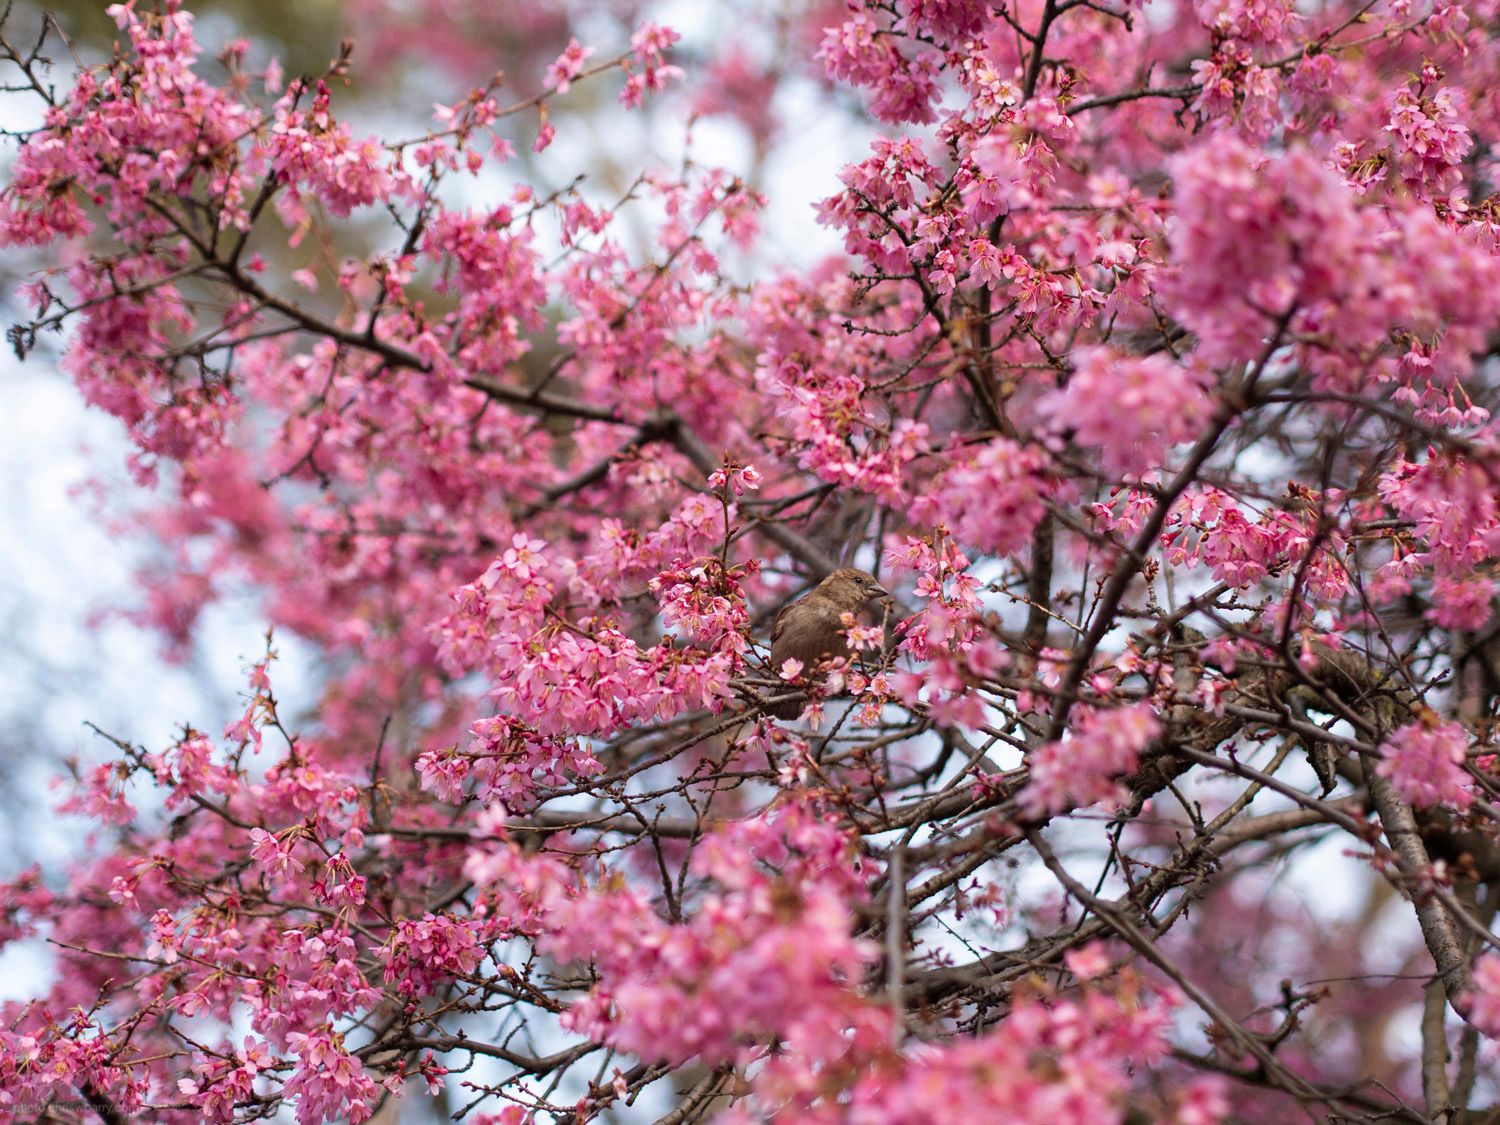 A photograph of a small brown bird in the middle of lots of bright pink cherry flowers.